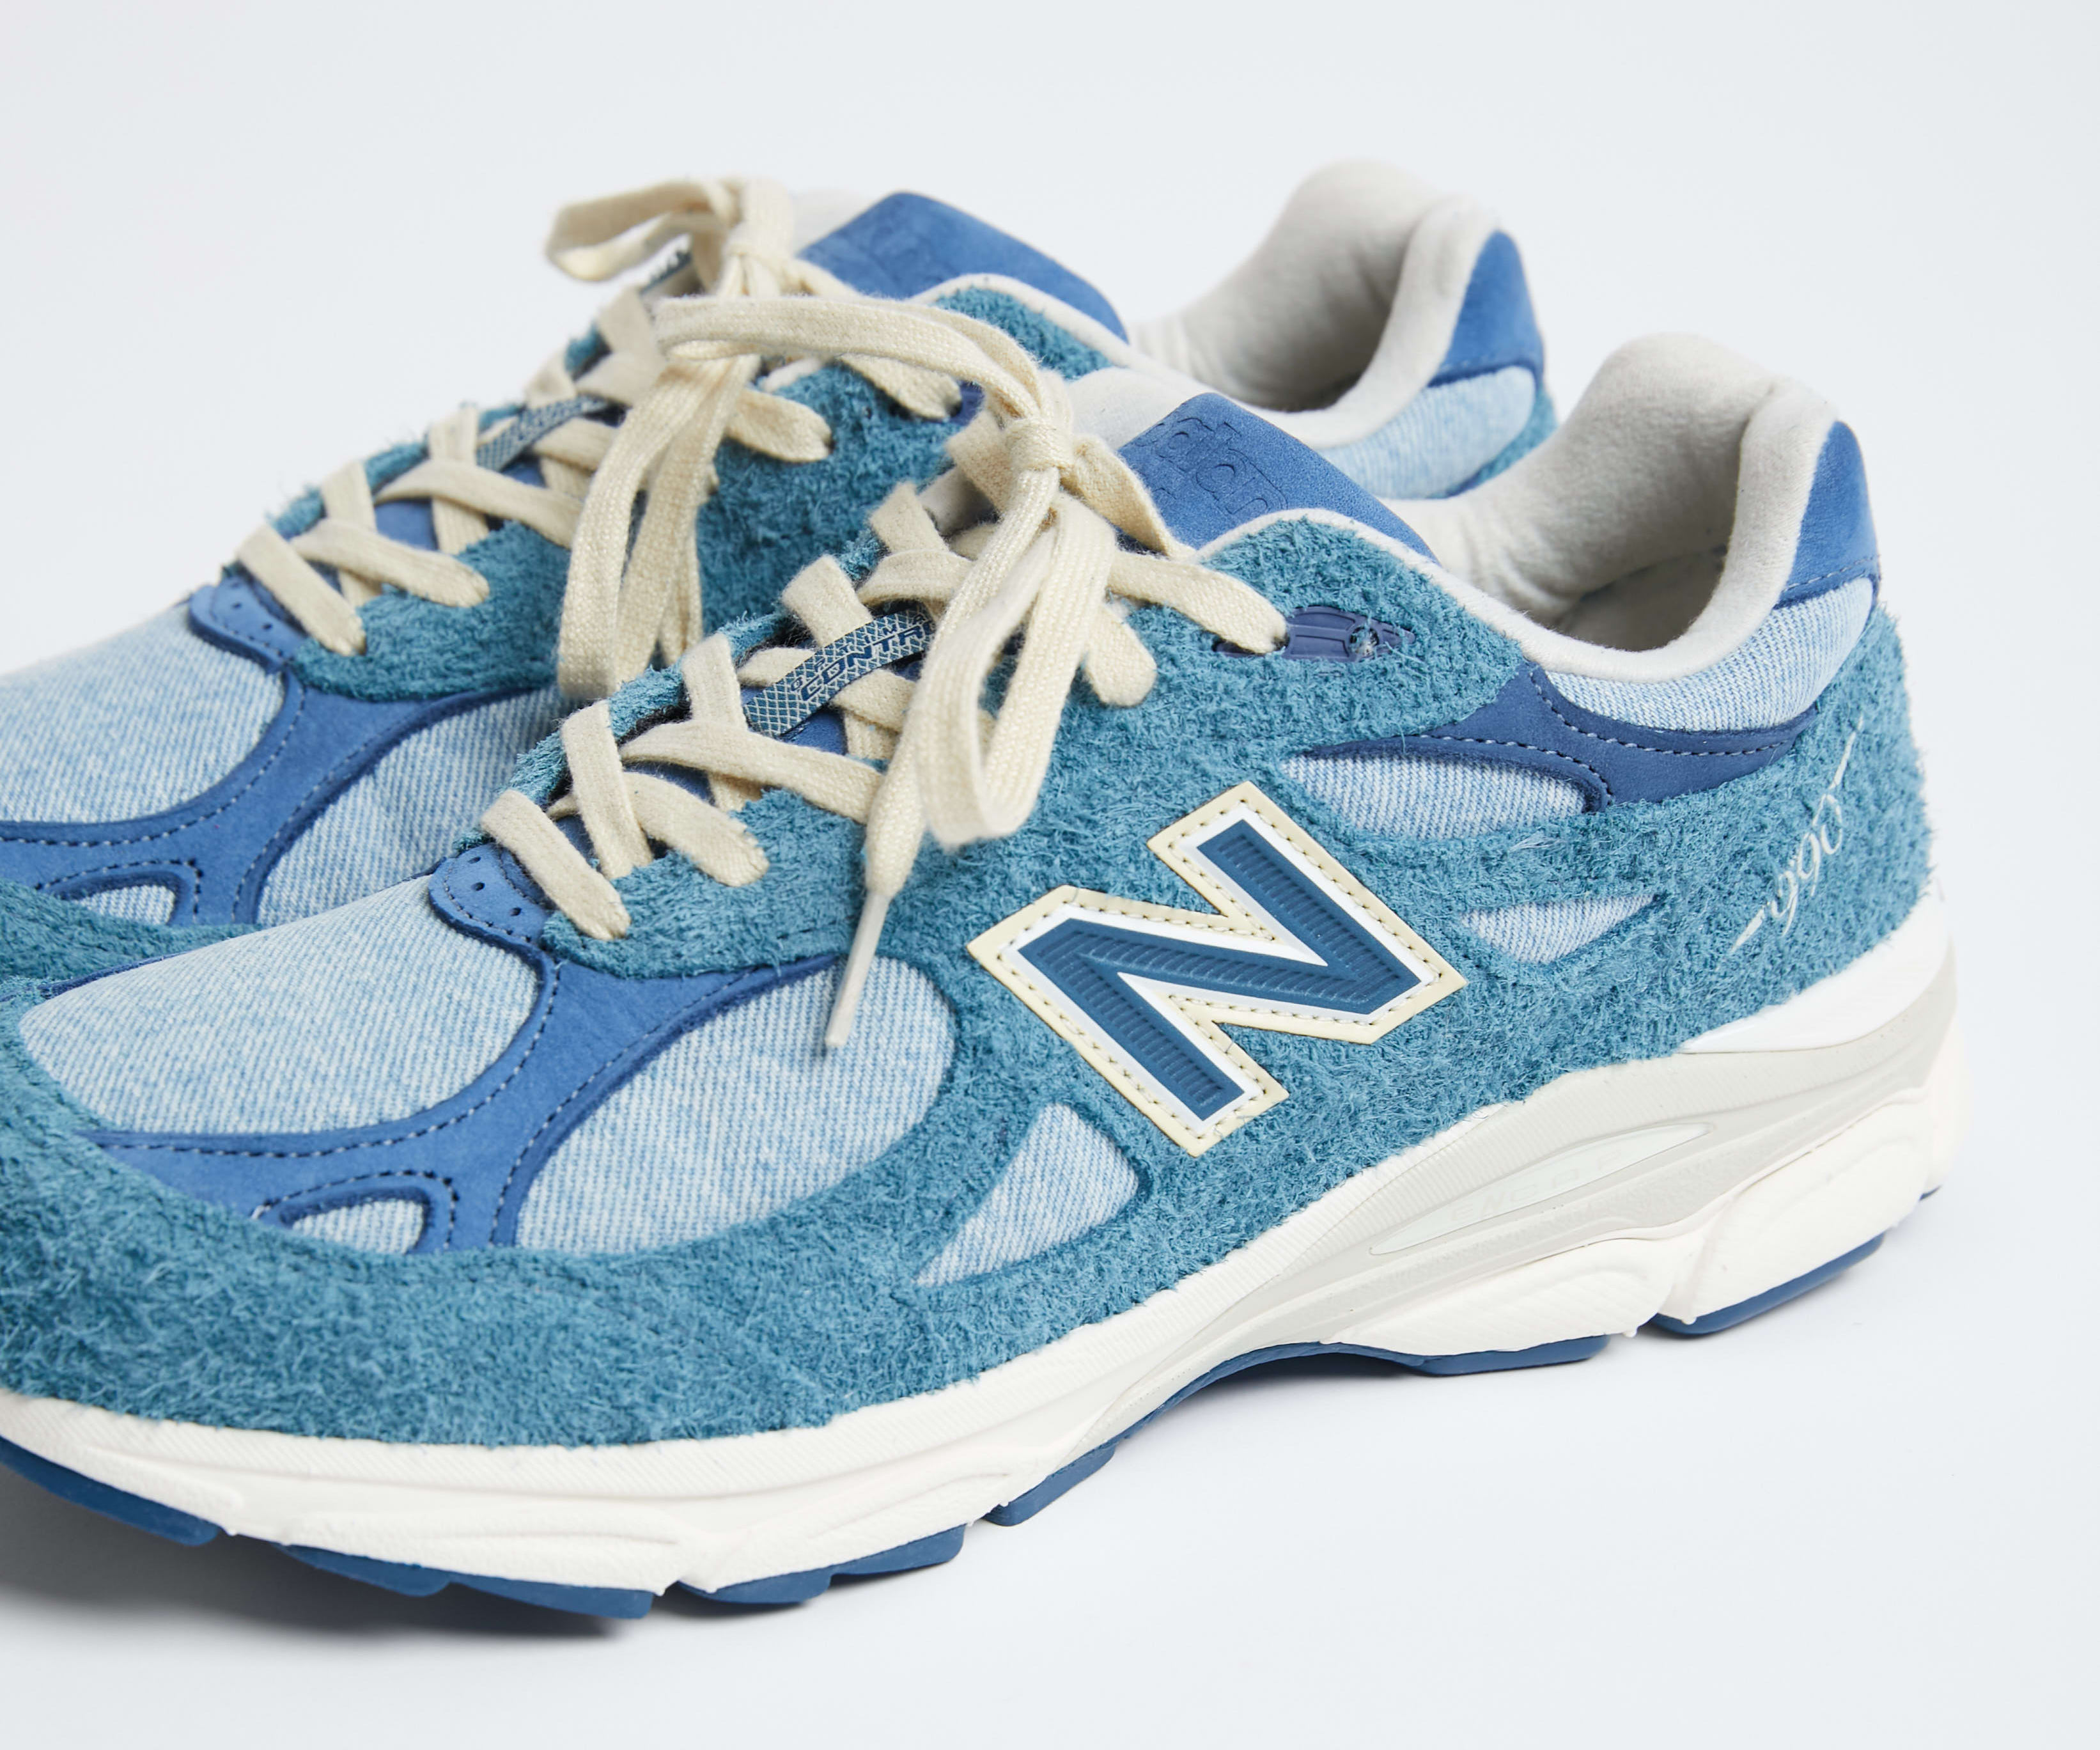 Levi's x New Balance 990v3 Sneaker Collaboration Release Date ...